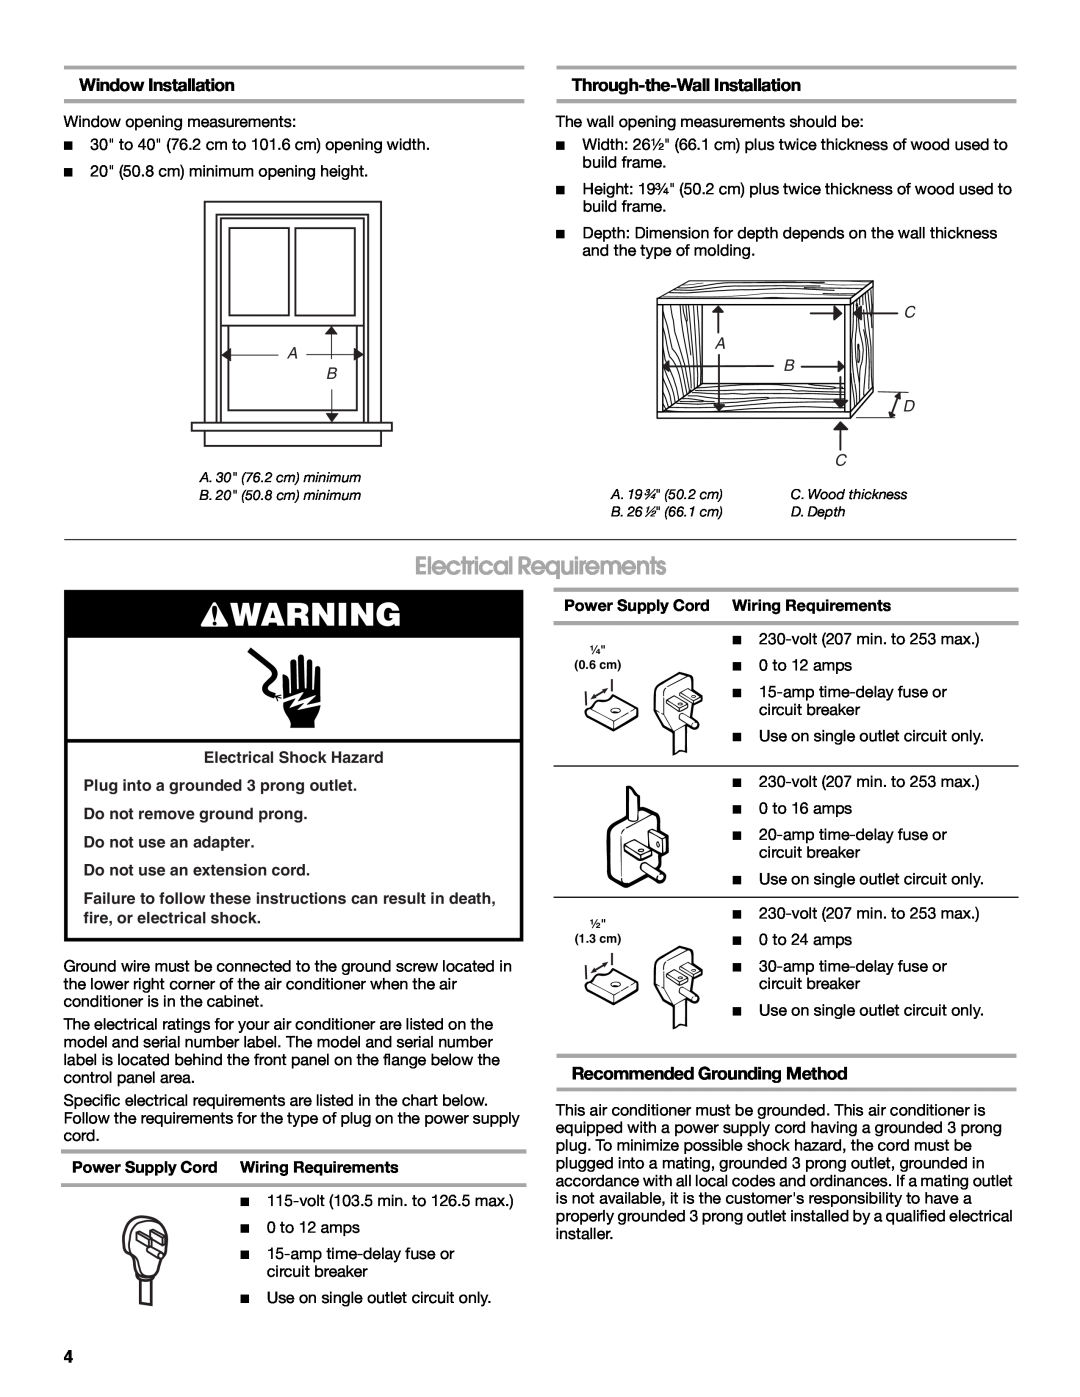 Whirlpool ACE184PT0 manual Electrical Requirements, Window Installation, Recommended Grounding Method 